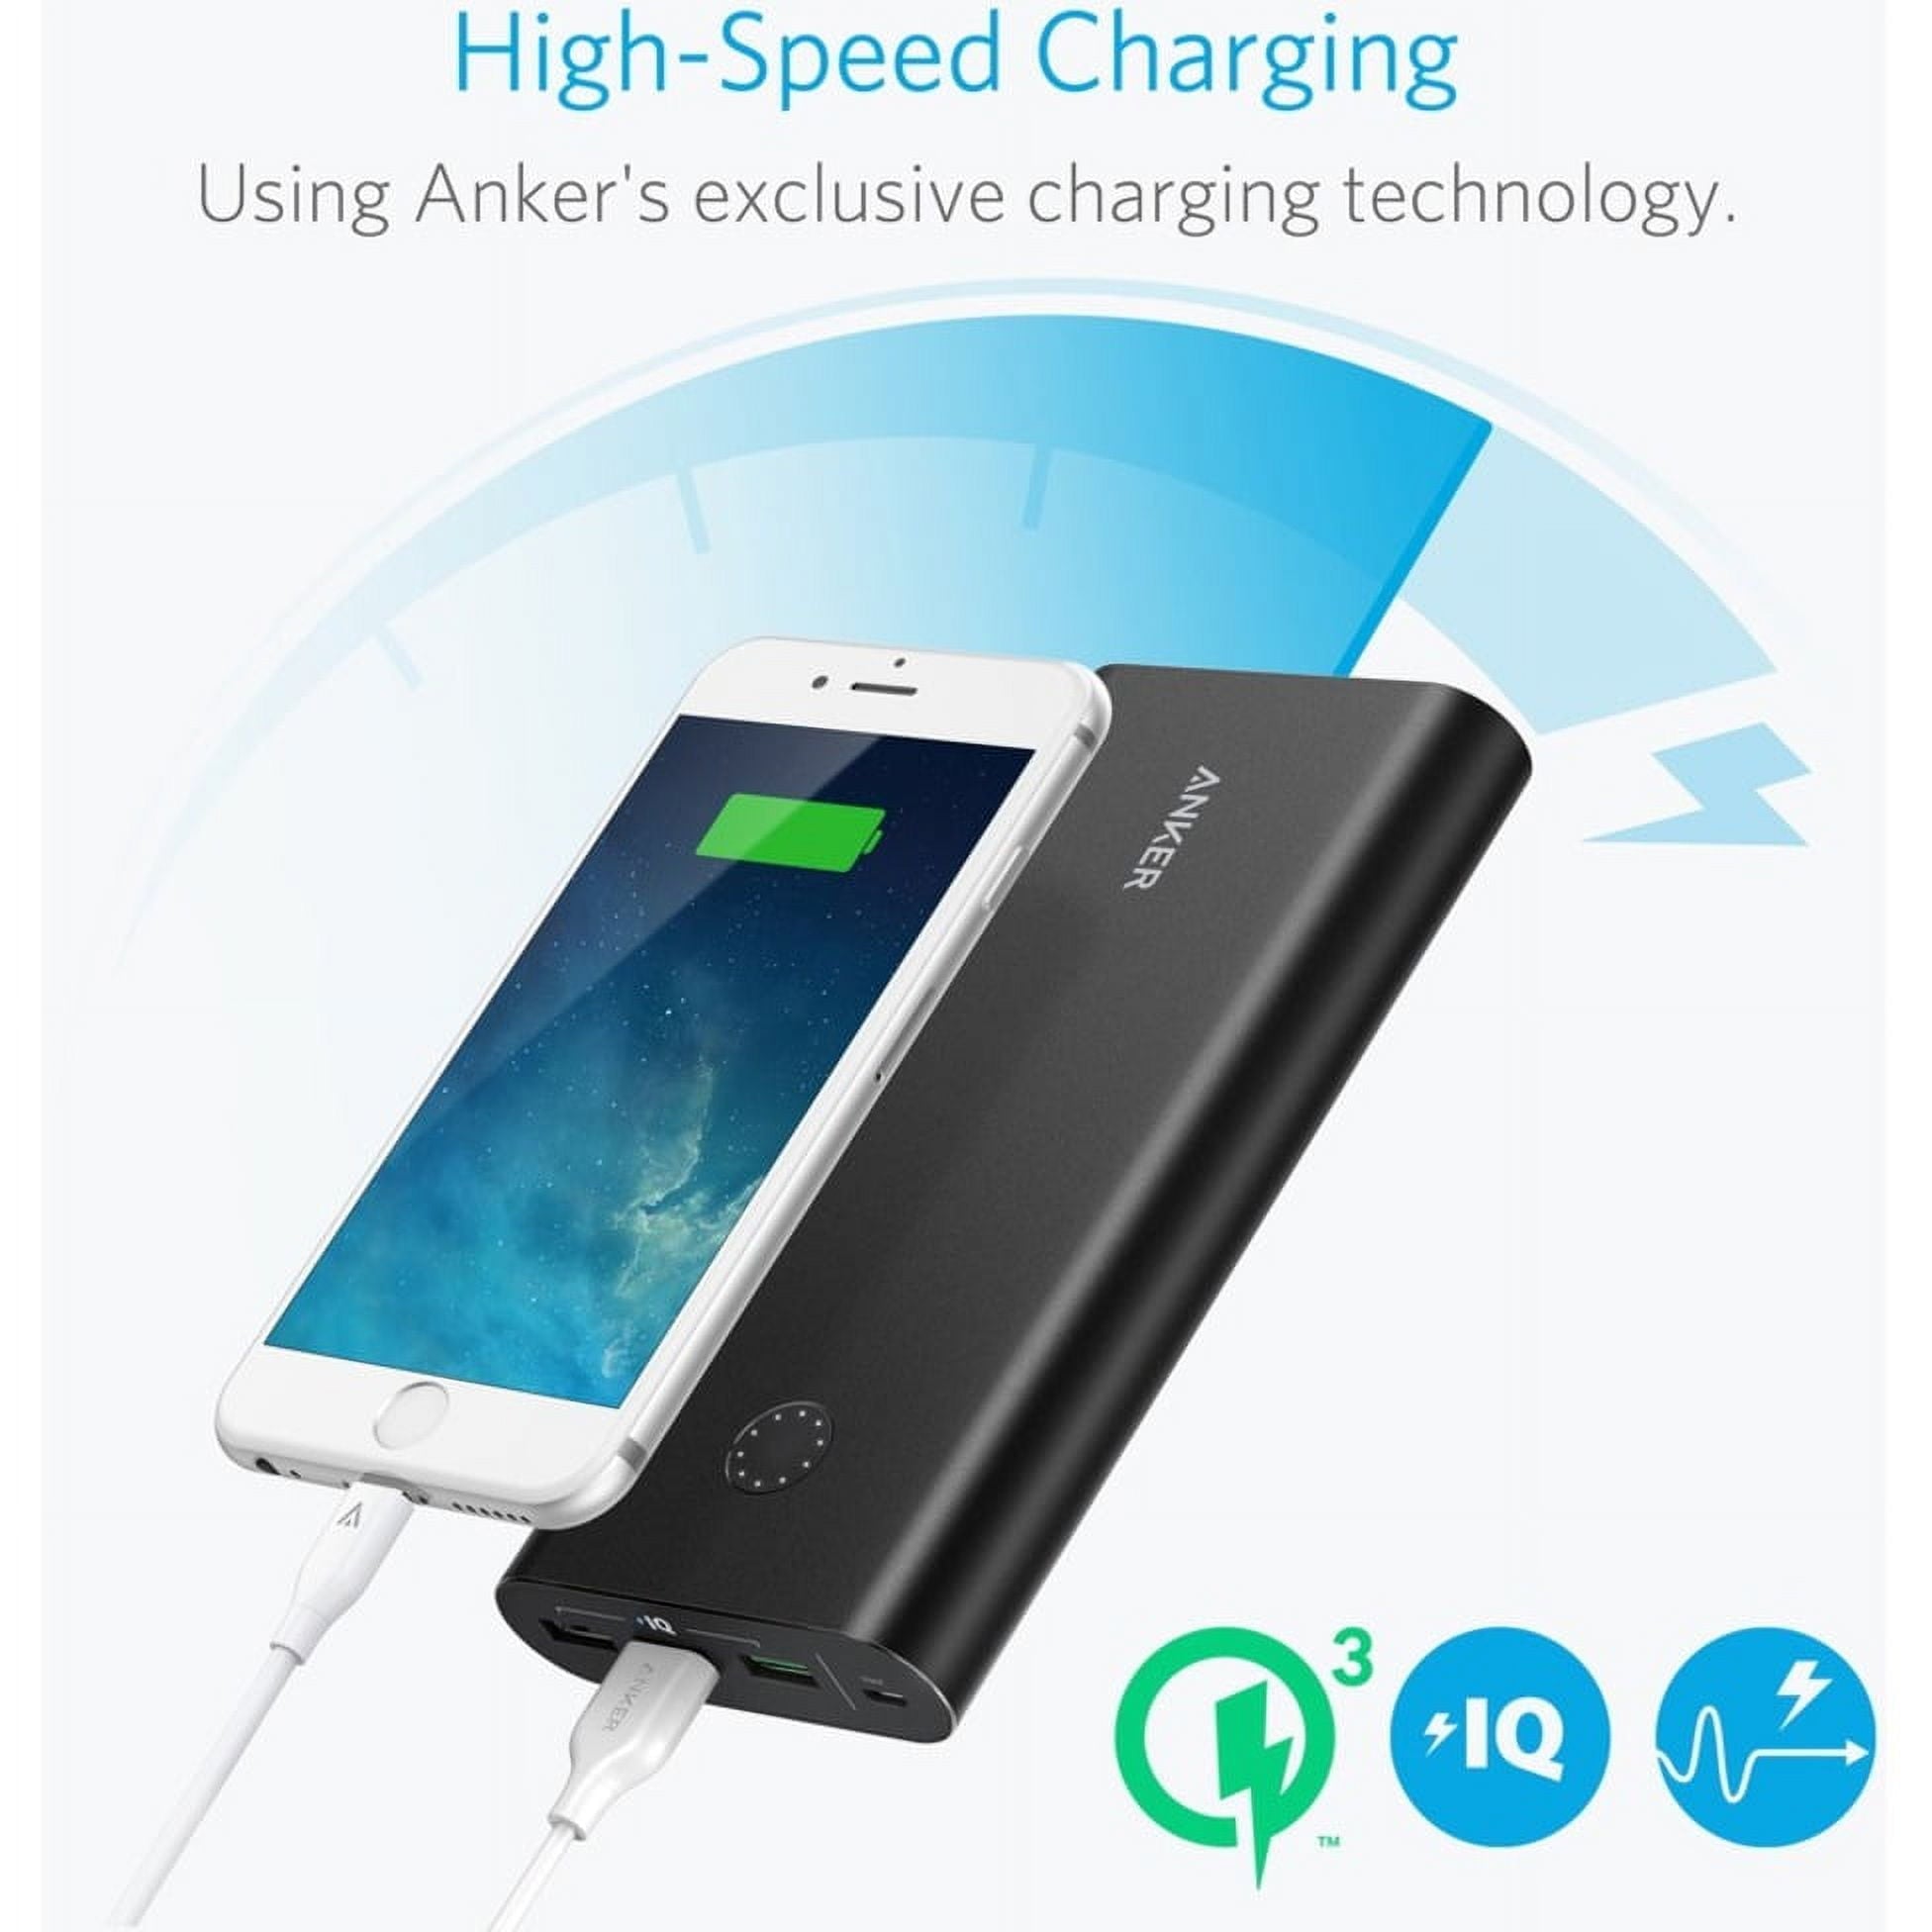 ANKER POWERCORE+ 26800 QUICK CHARGE WITH MICRO USB AND USB-A PORTS- BLACK